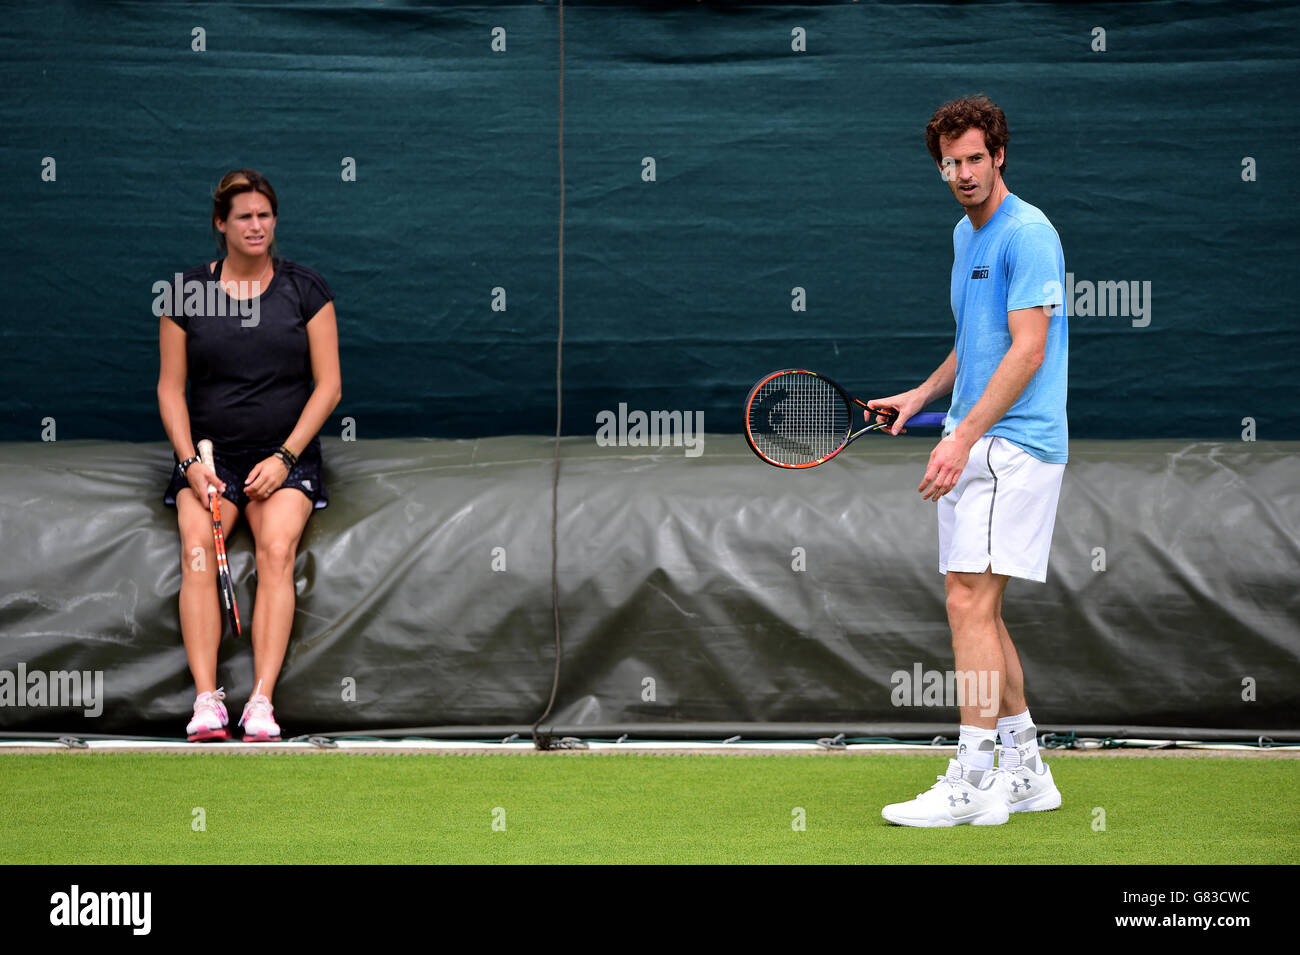 Andy Murray with Amelie Mauresmo (left) during practice on day one of the Wimbledon Championships at the All England Lawn Tennis and Croquet Club, Wimbledon. Stock Photo